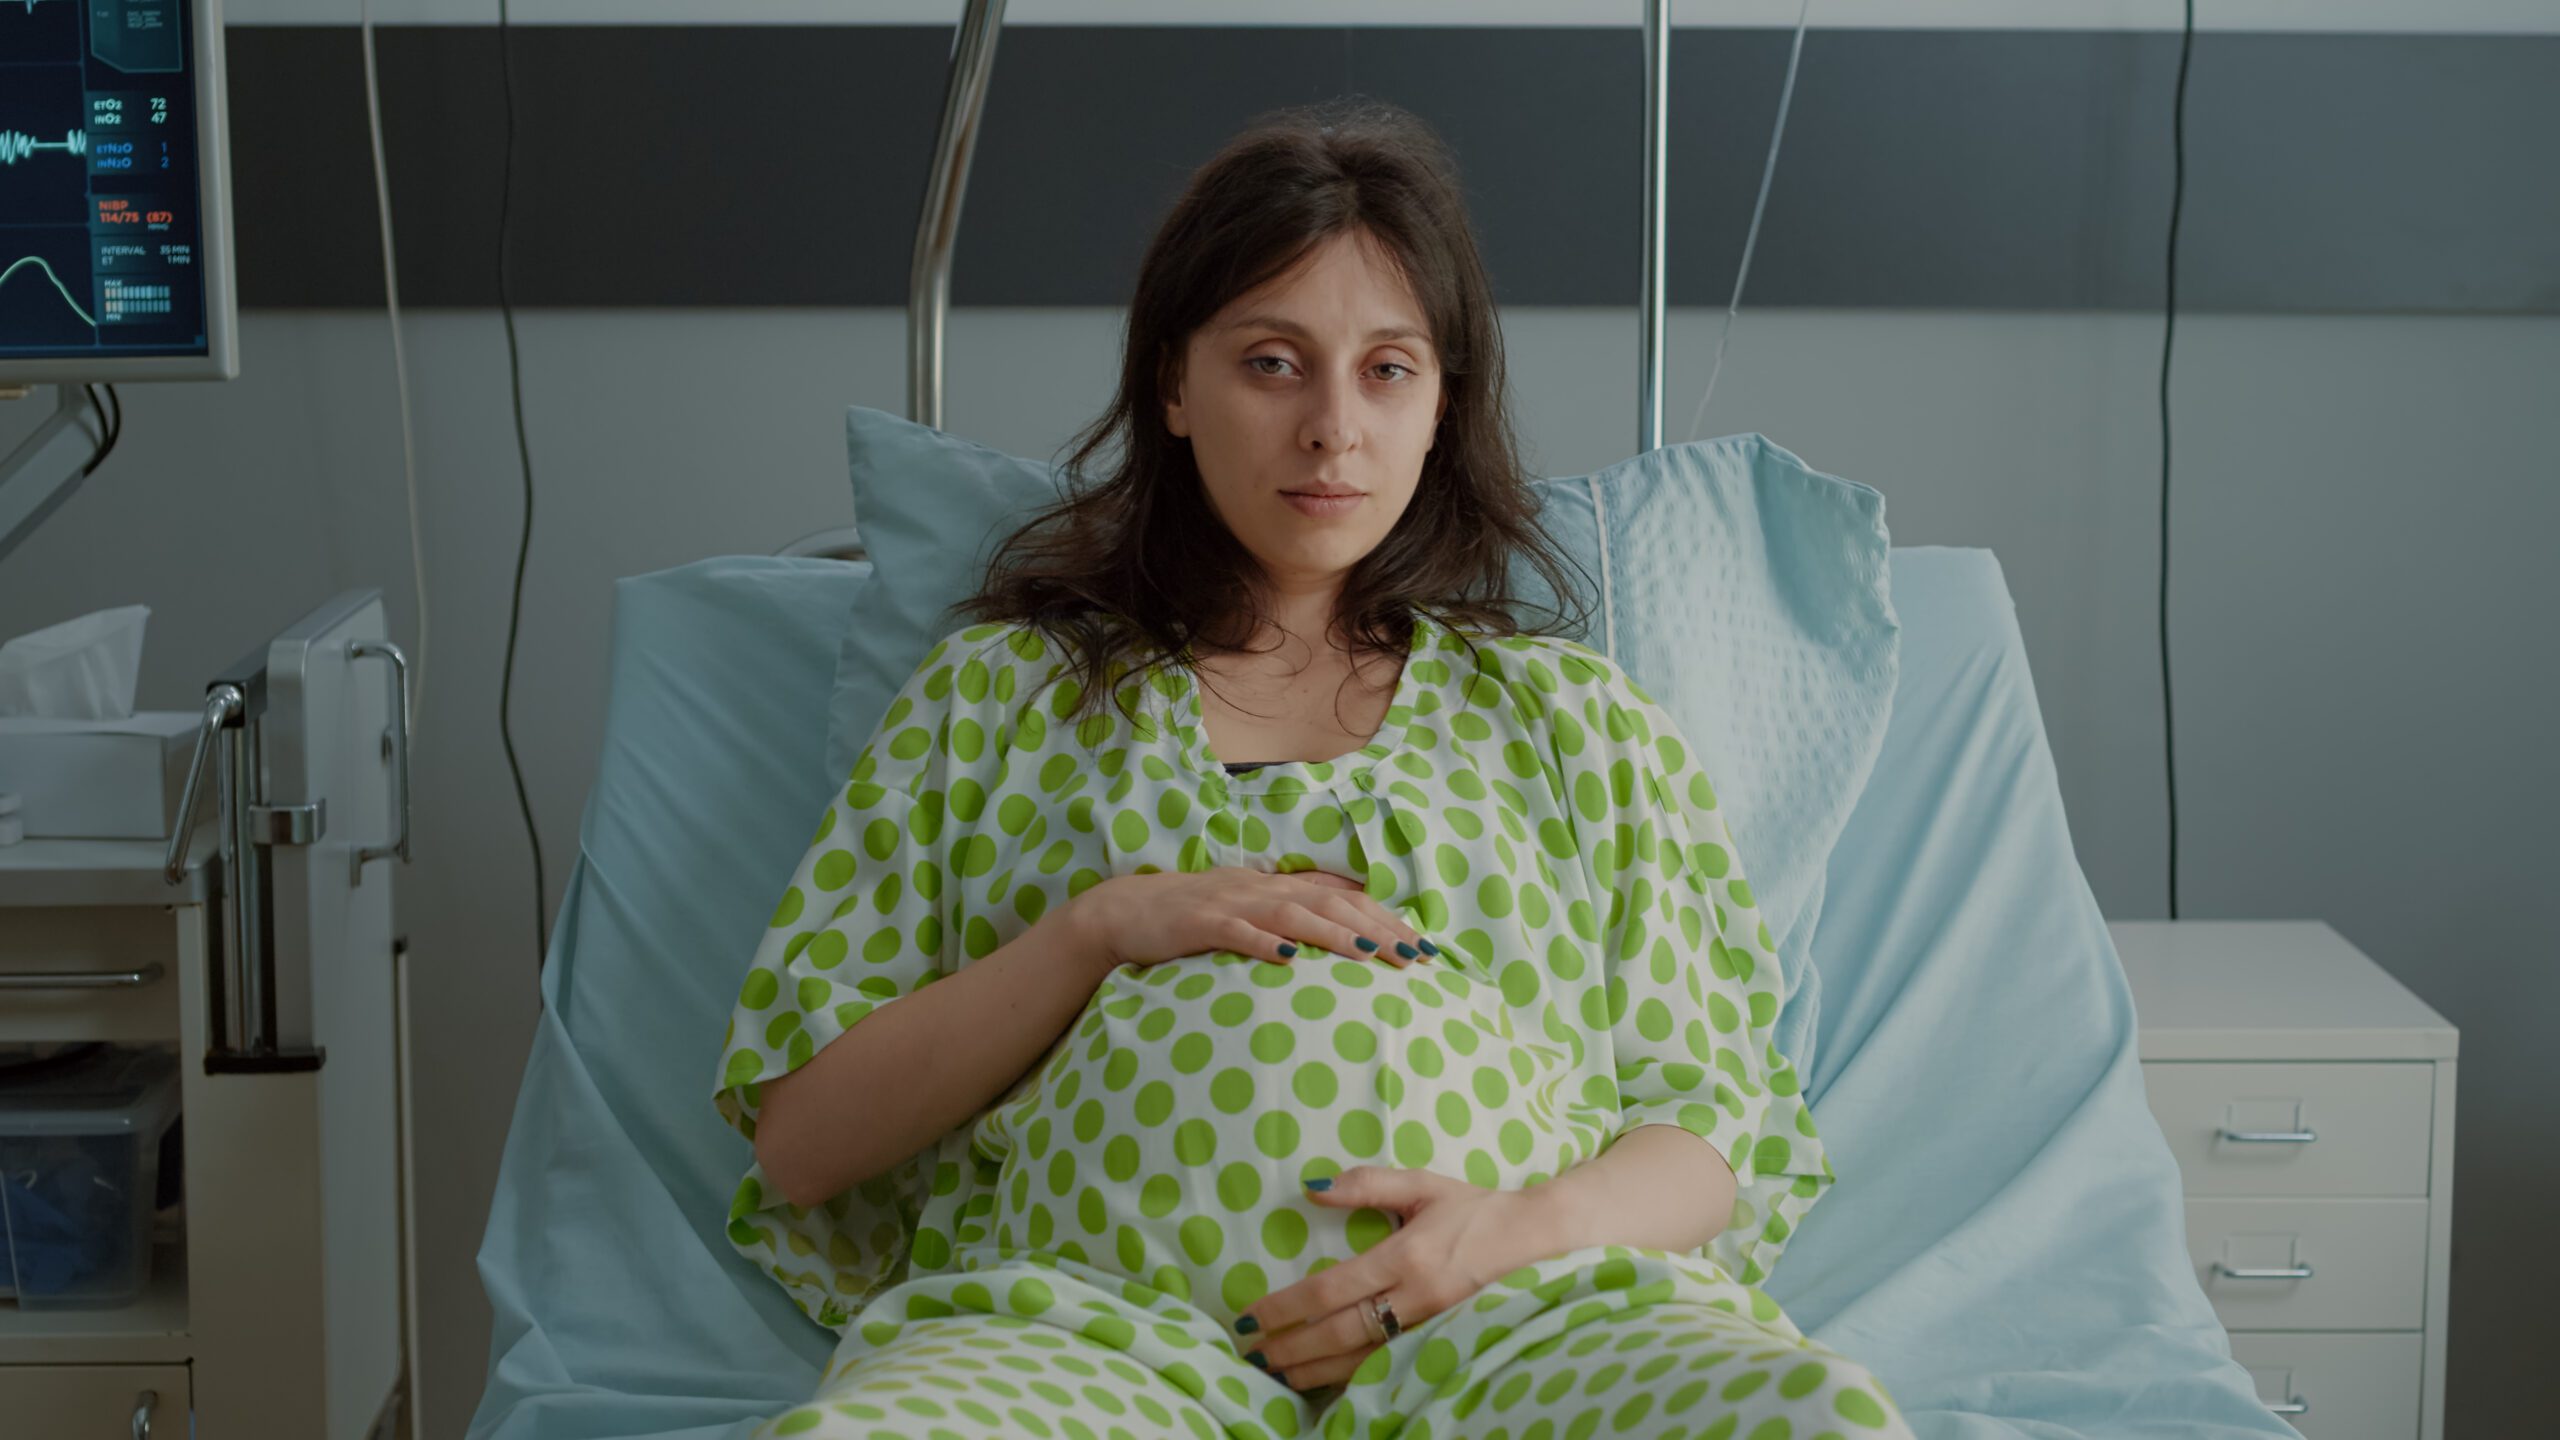 Portrait of pregnant woman laying in hospital ward bed